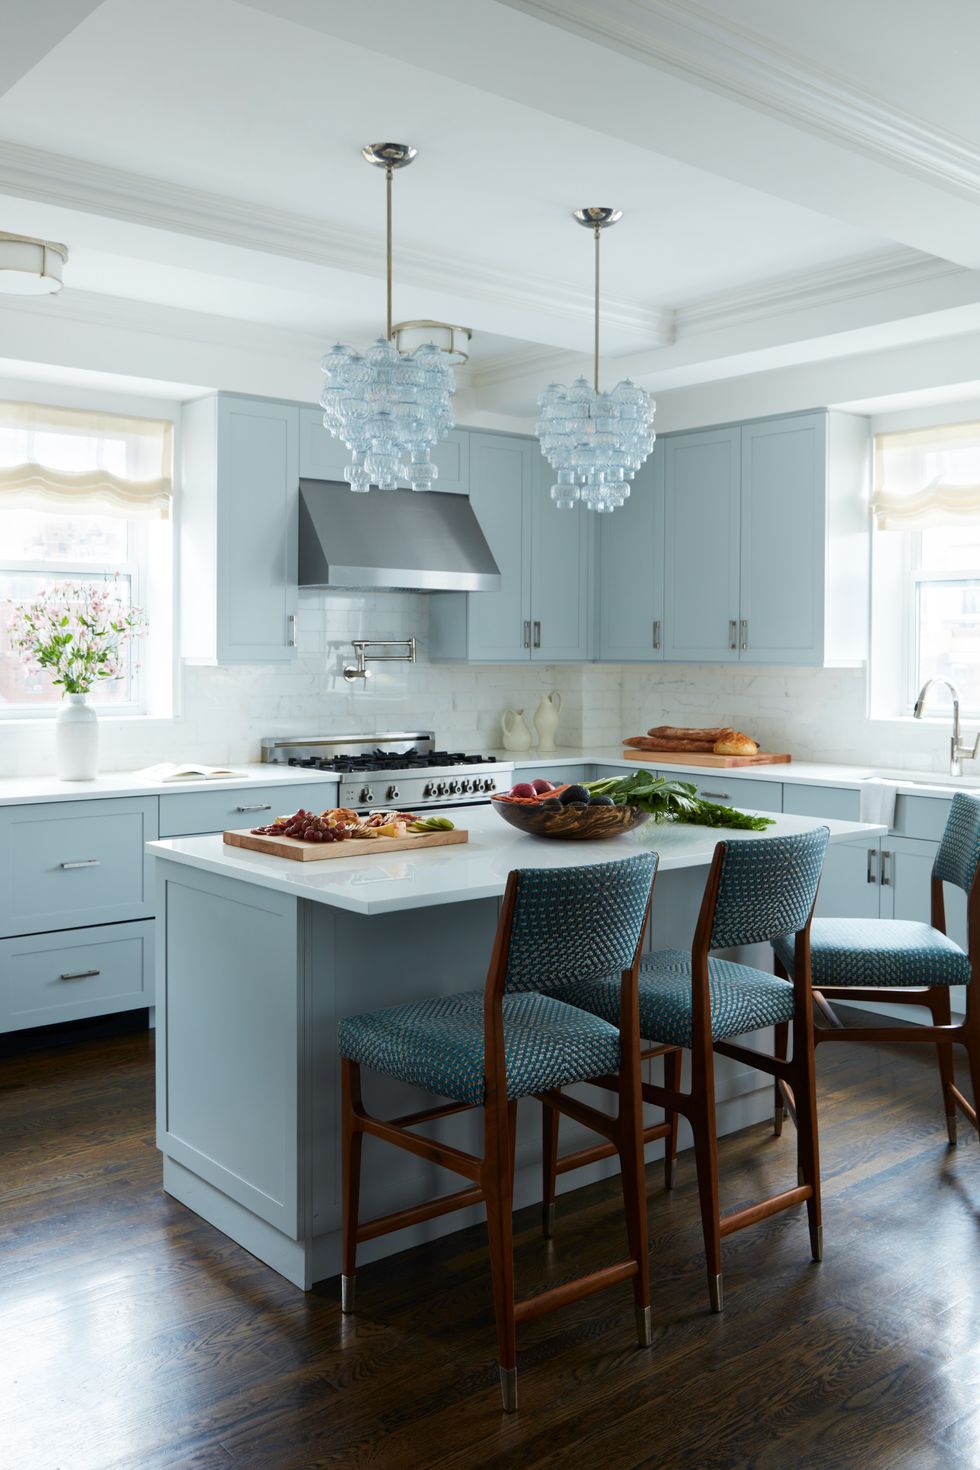 Ninja CREAMi Colors: Options For Every Kitchen